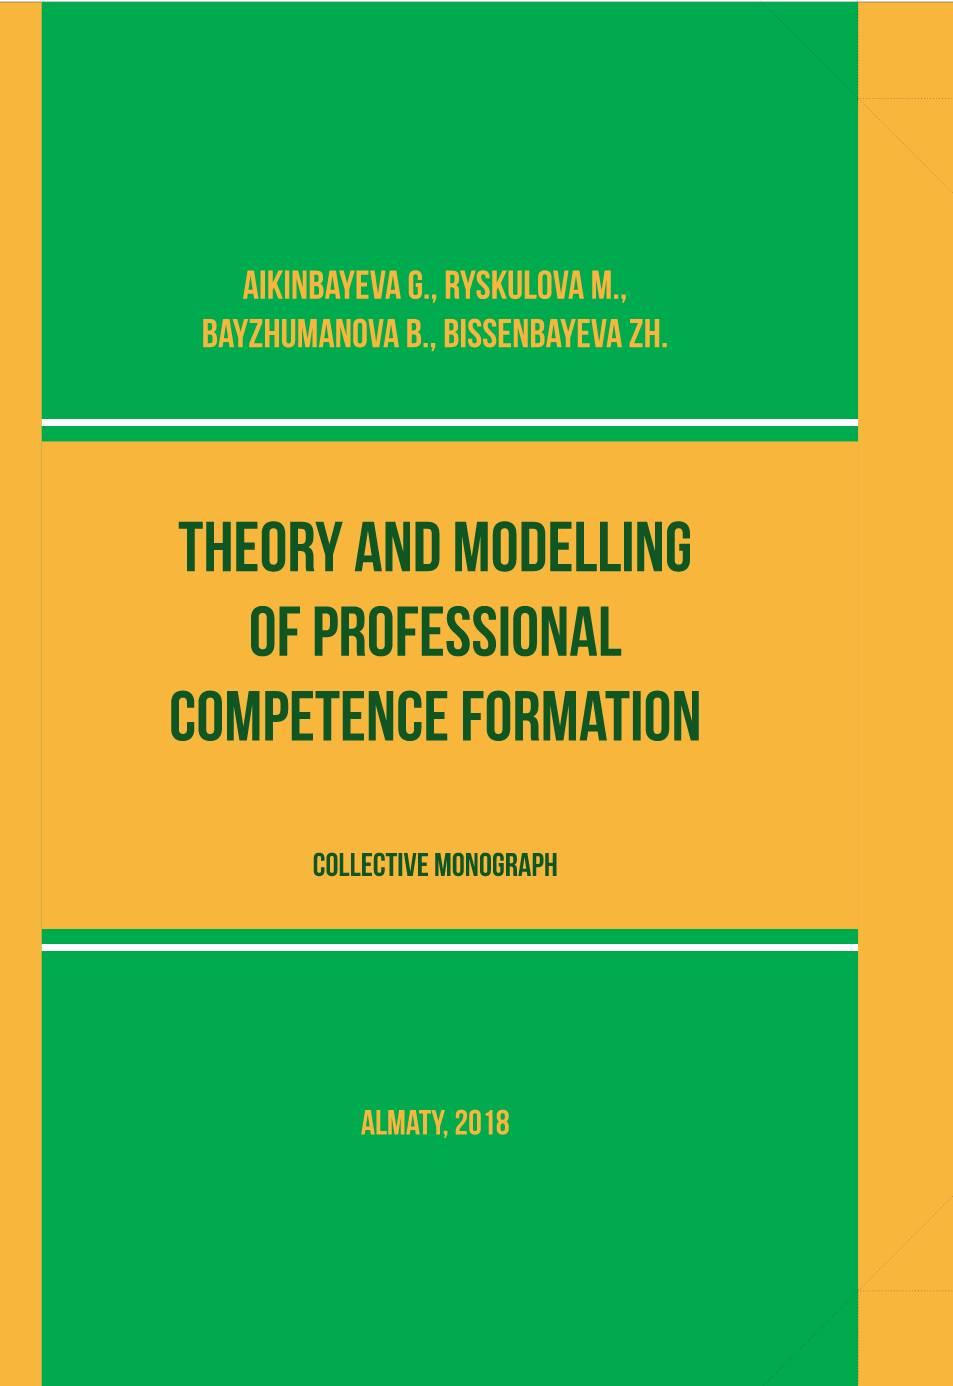 Theory and modelling of professional competence formation. Monograph.